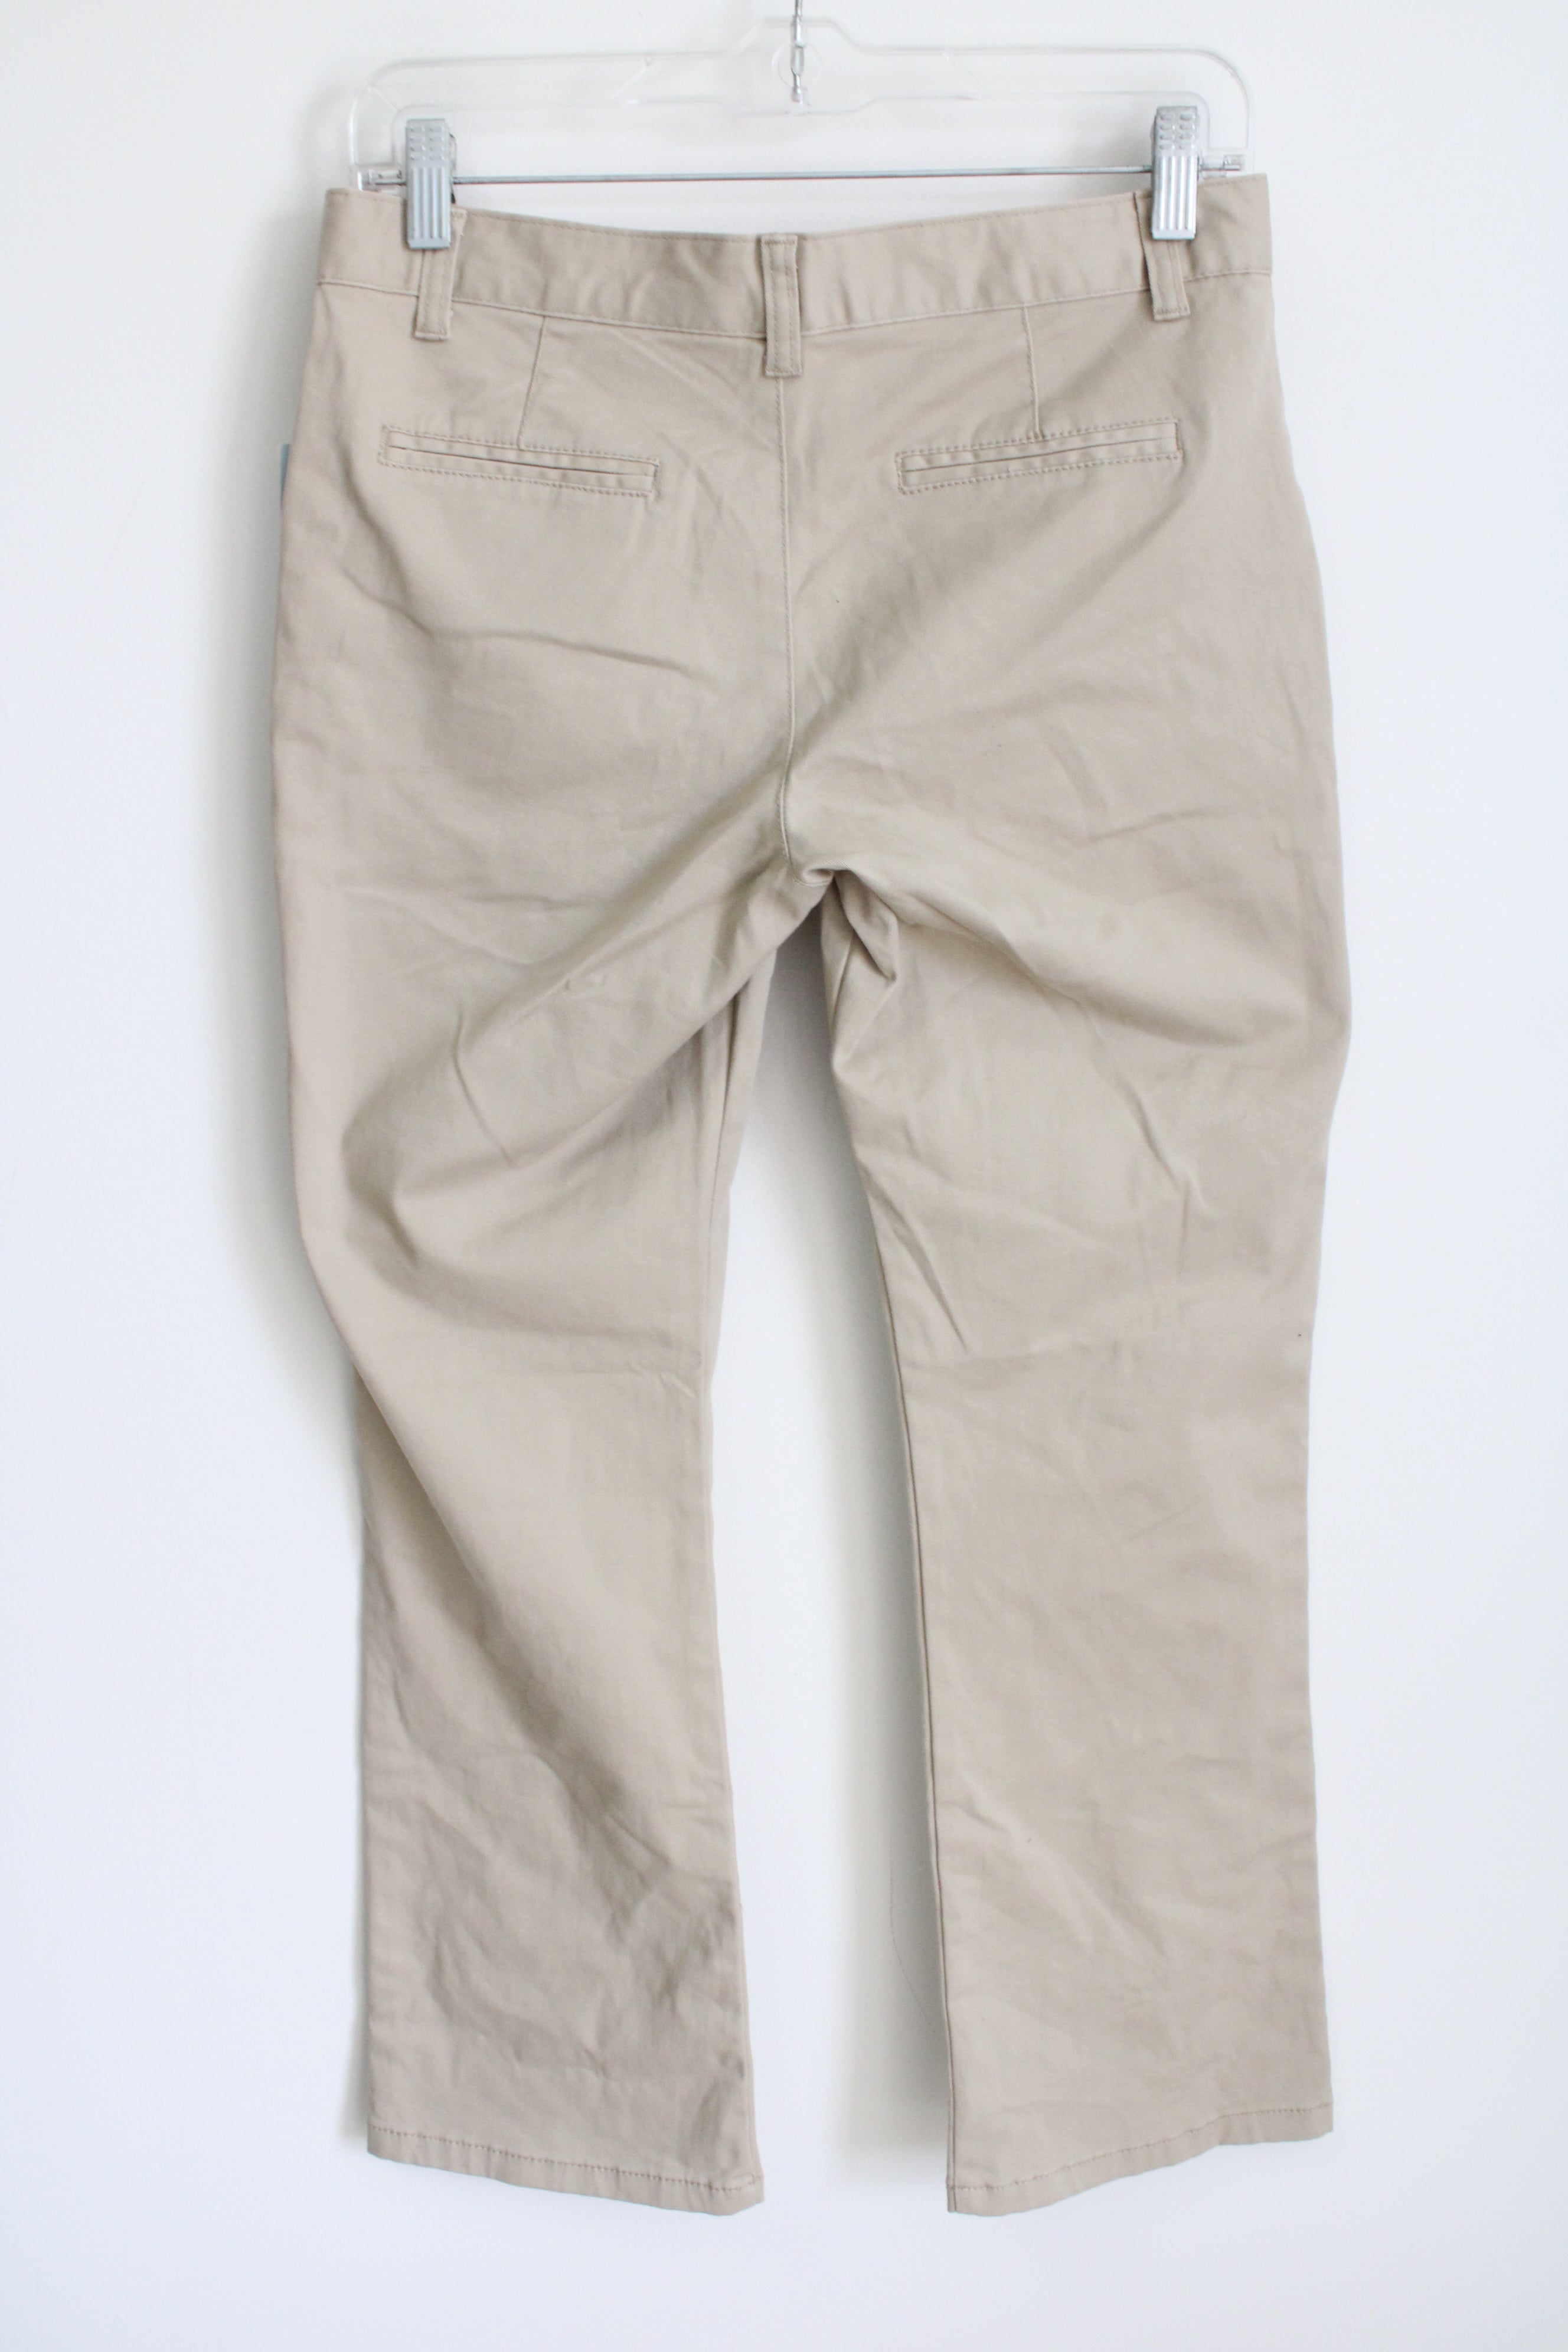 NEW Cat and Jack Stretch Tan Pants | 12 Plus